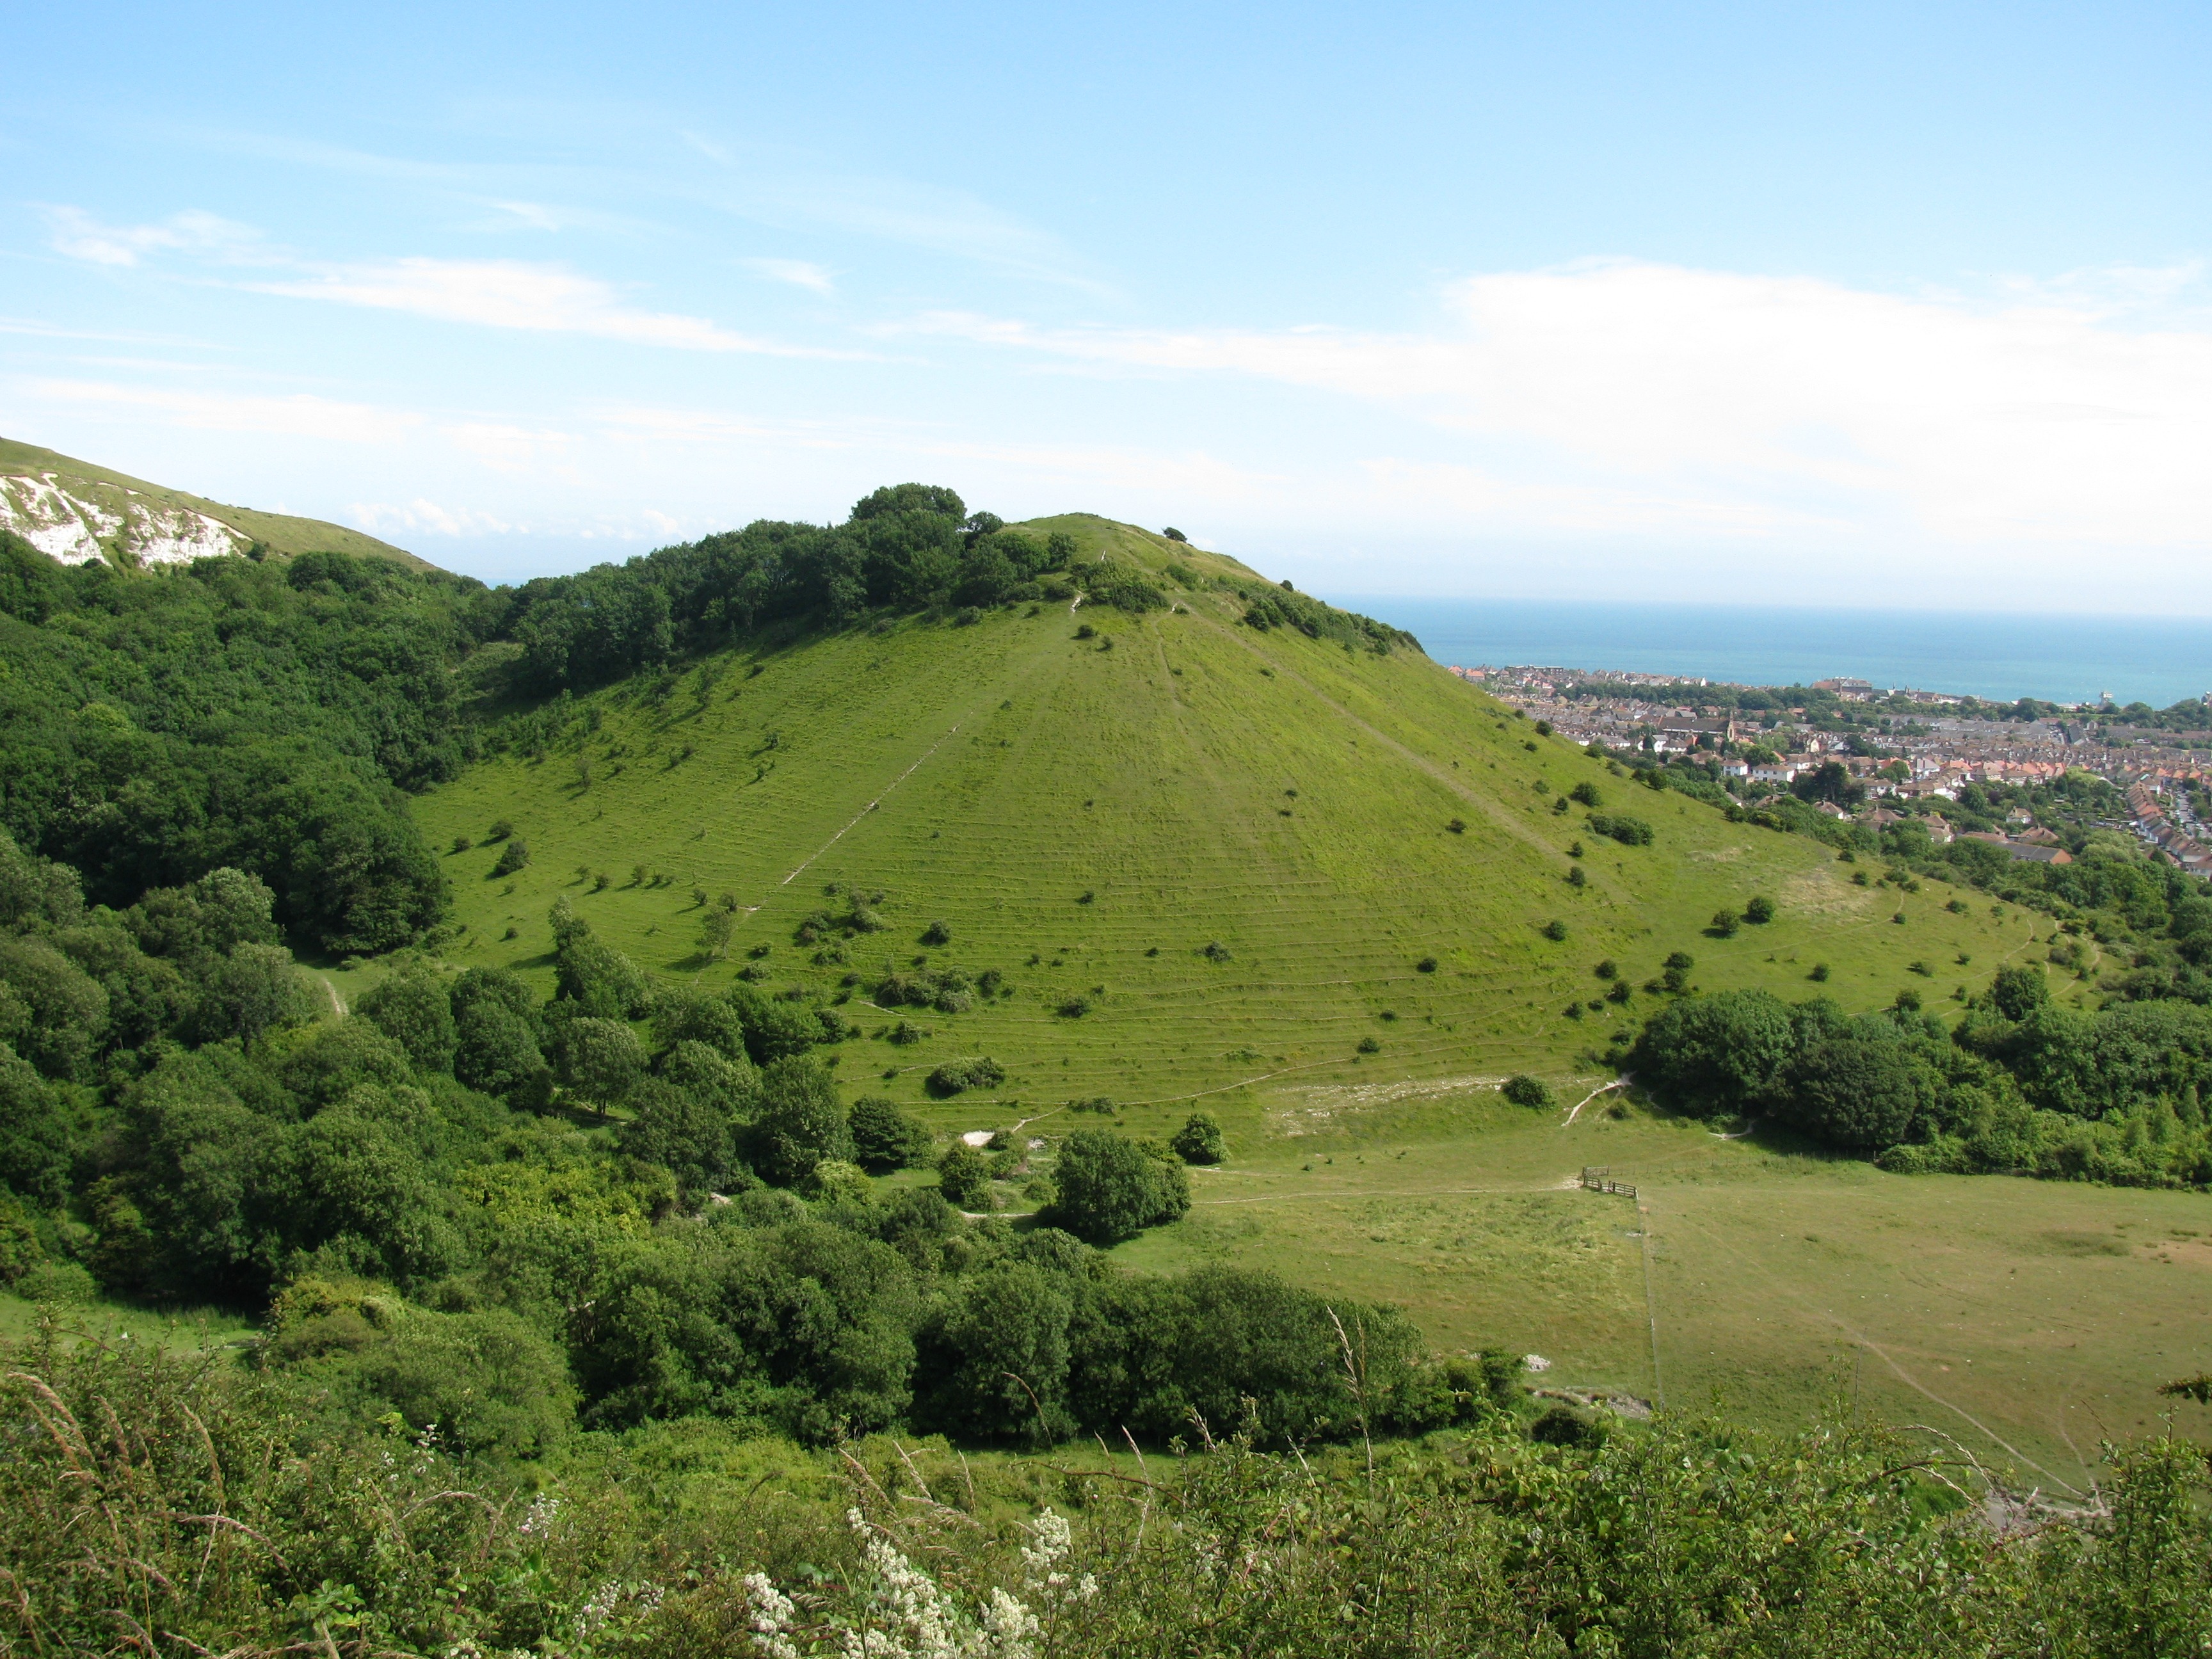 The rounded hills of Folkestone Downs in southern England.